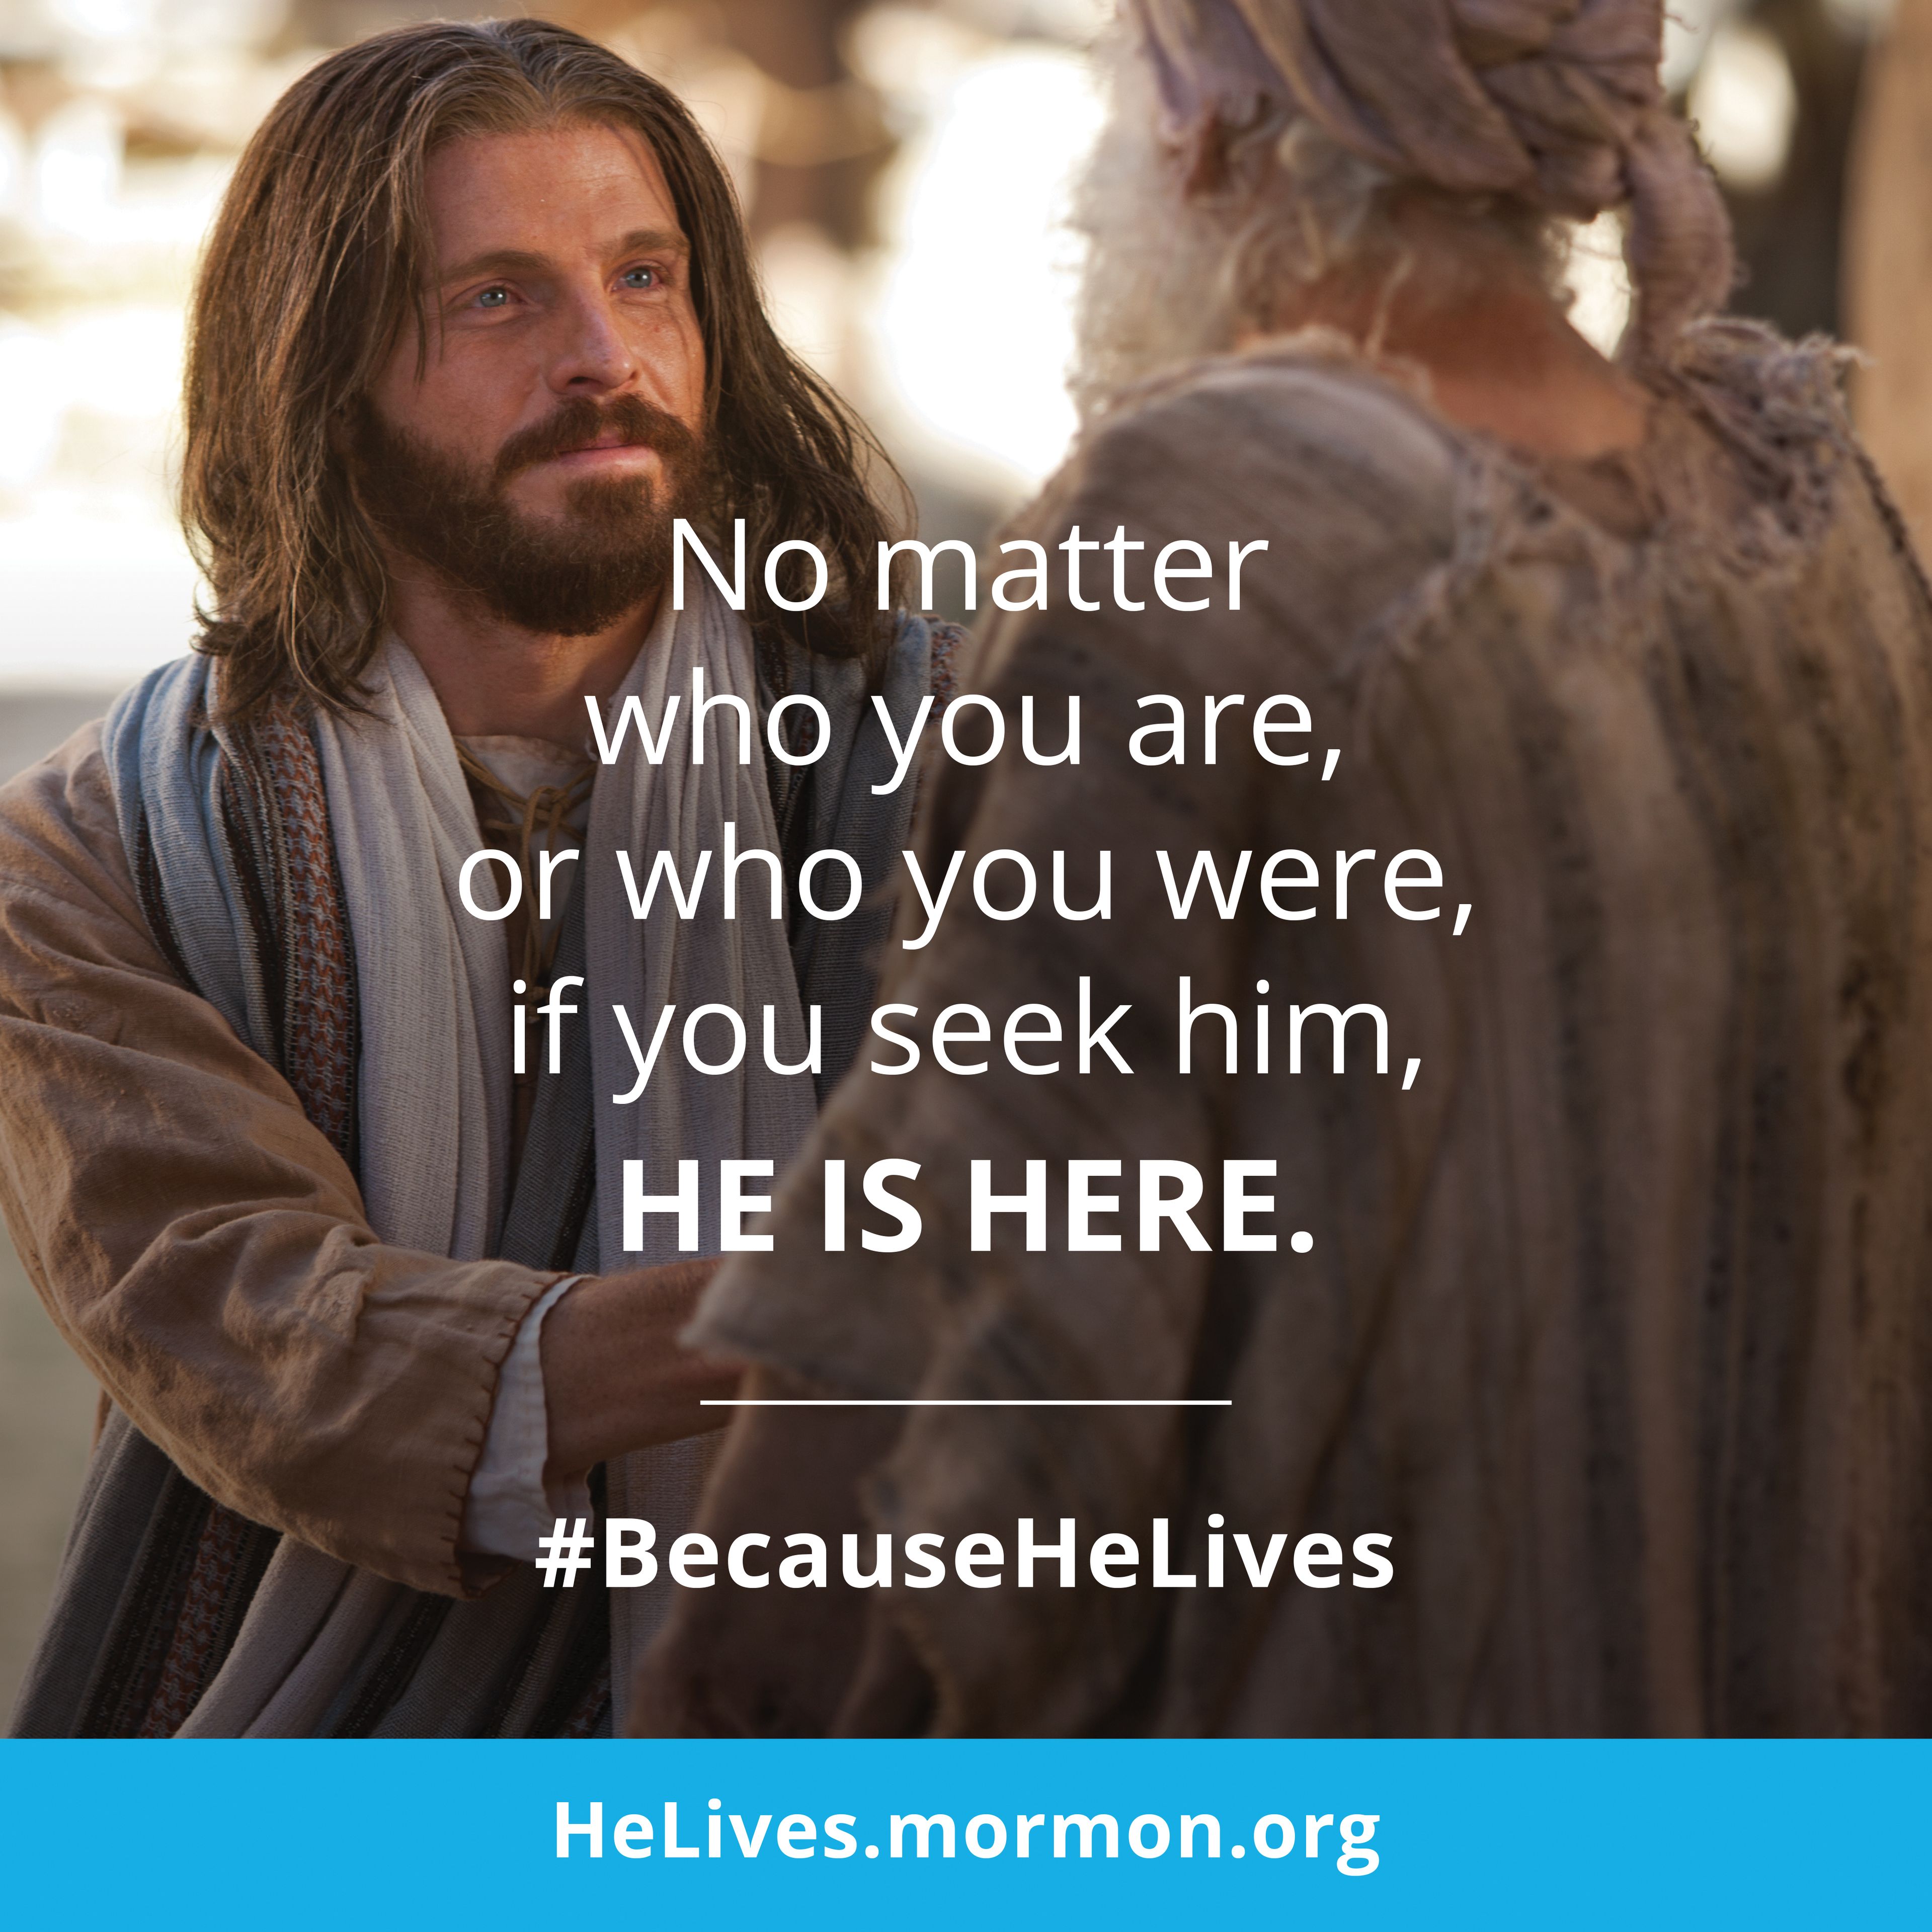 No matter who you are, or who you were, if you seek Him, He is here. #BecauseHeLives, HeLives.mormon.org